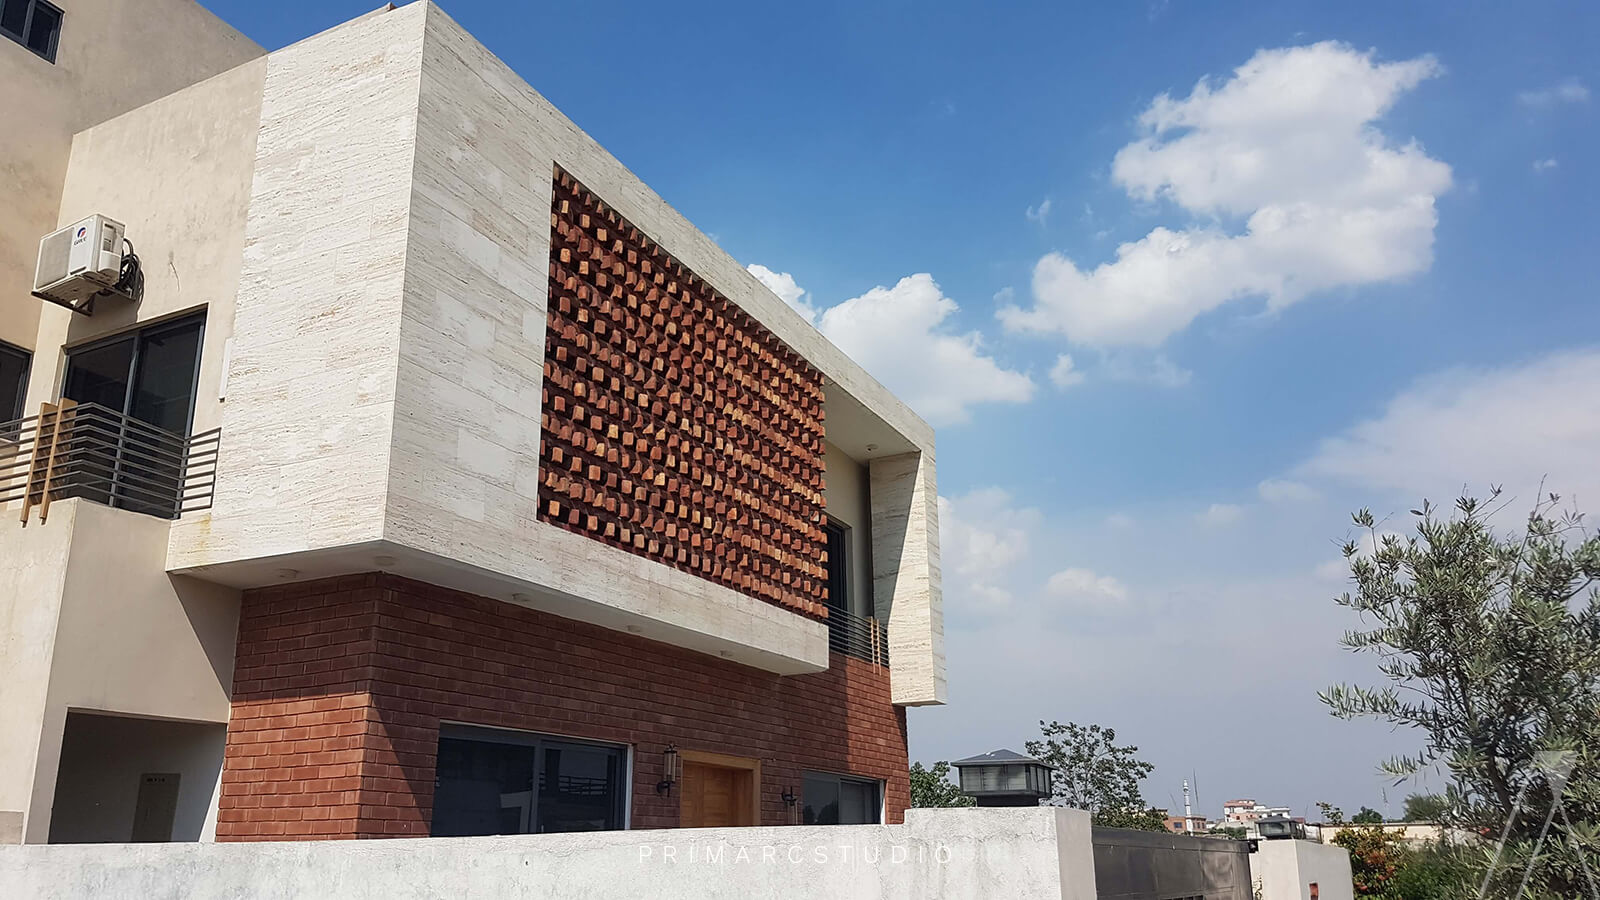 Shams House - DHA Phase II Modern brick house render by architects in islamabad